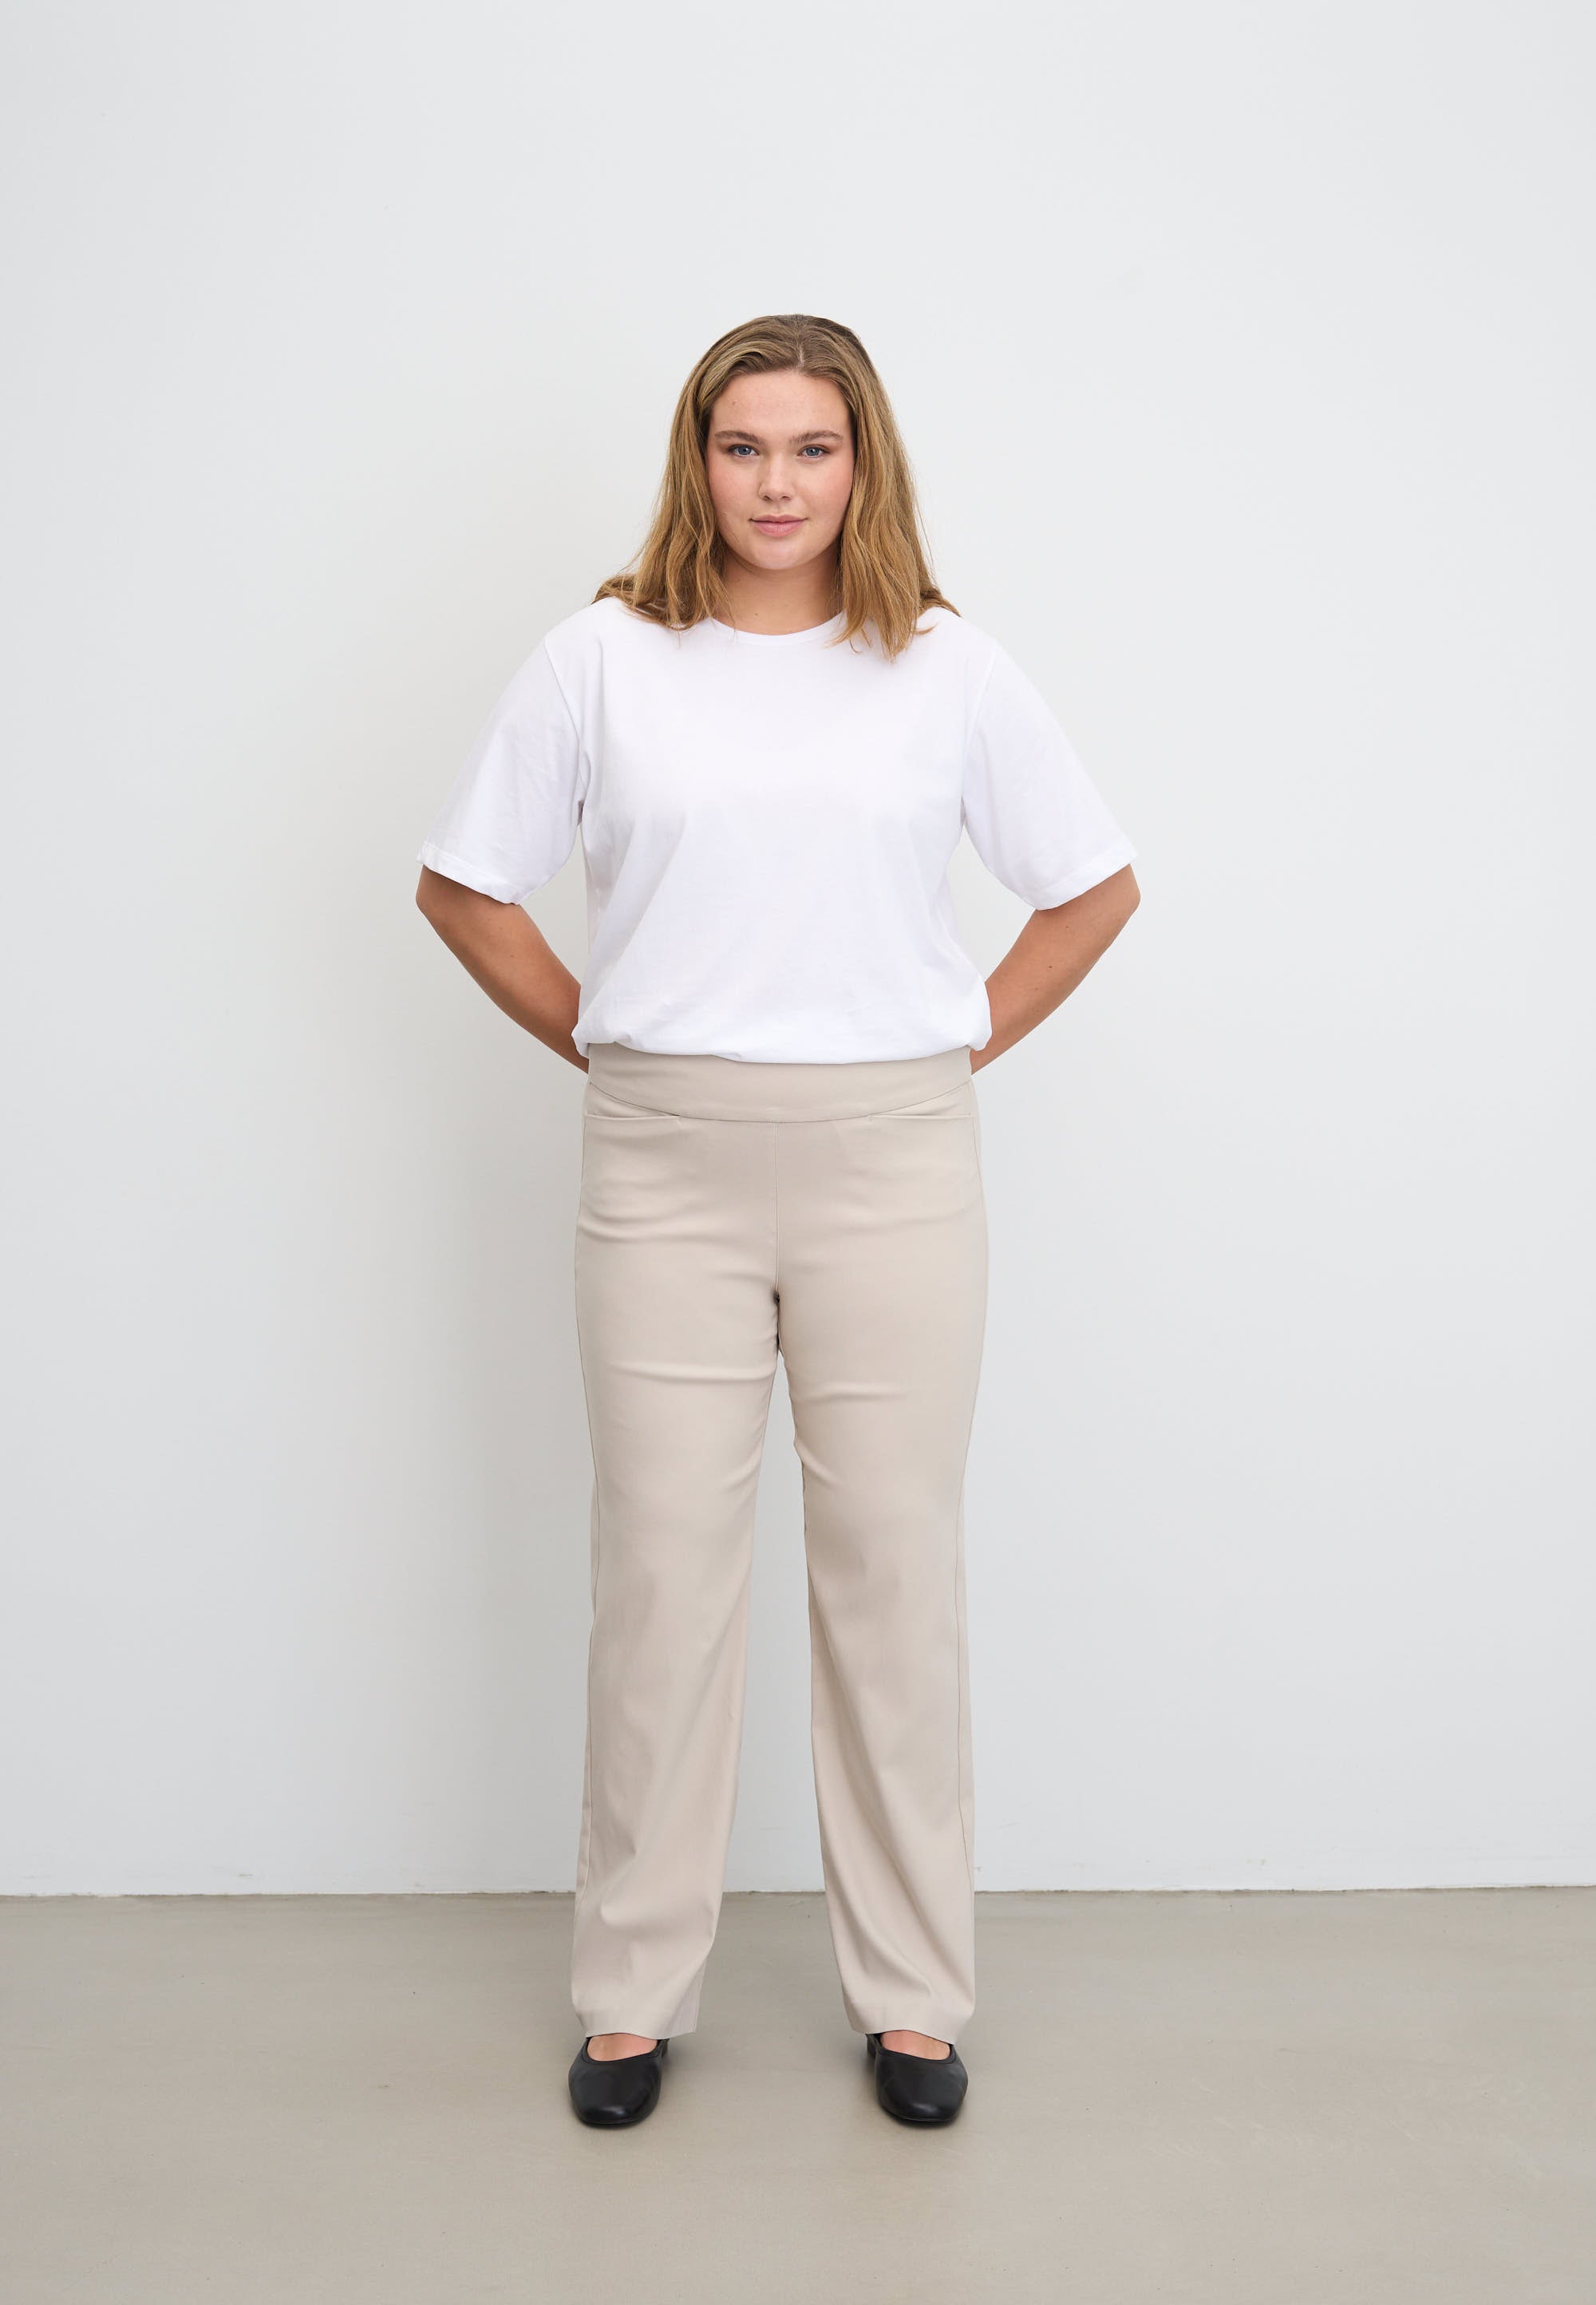 LAURIE Thea Straight - Medium Length Trousers STRAIGHT 25000 Grey Sand